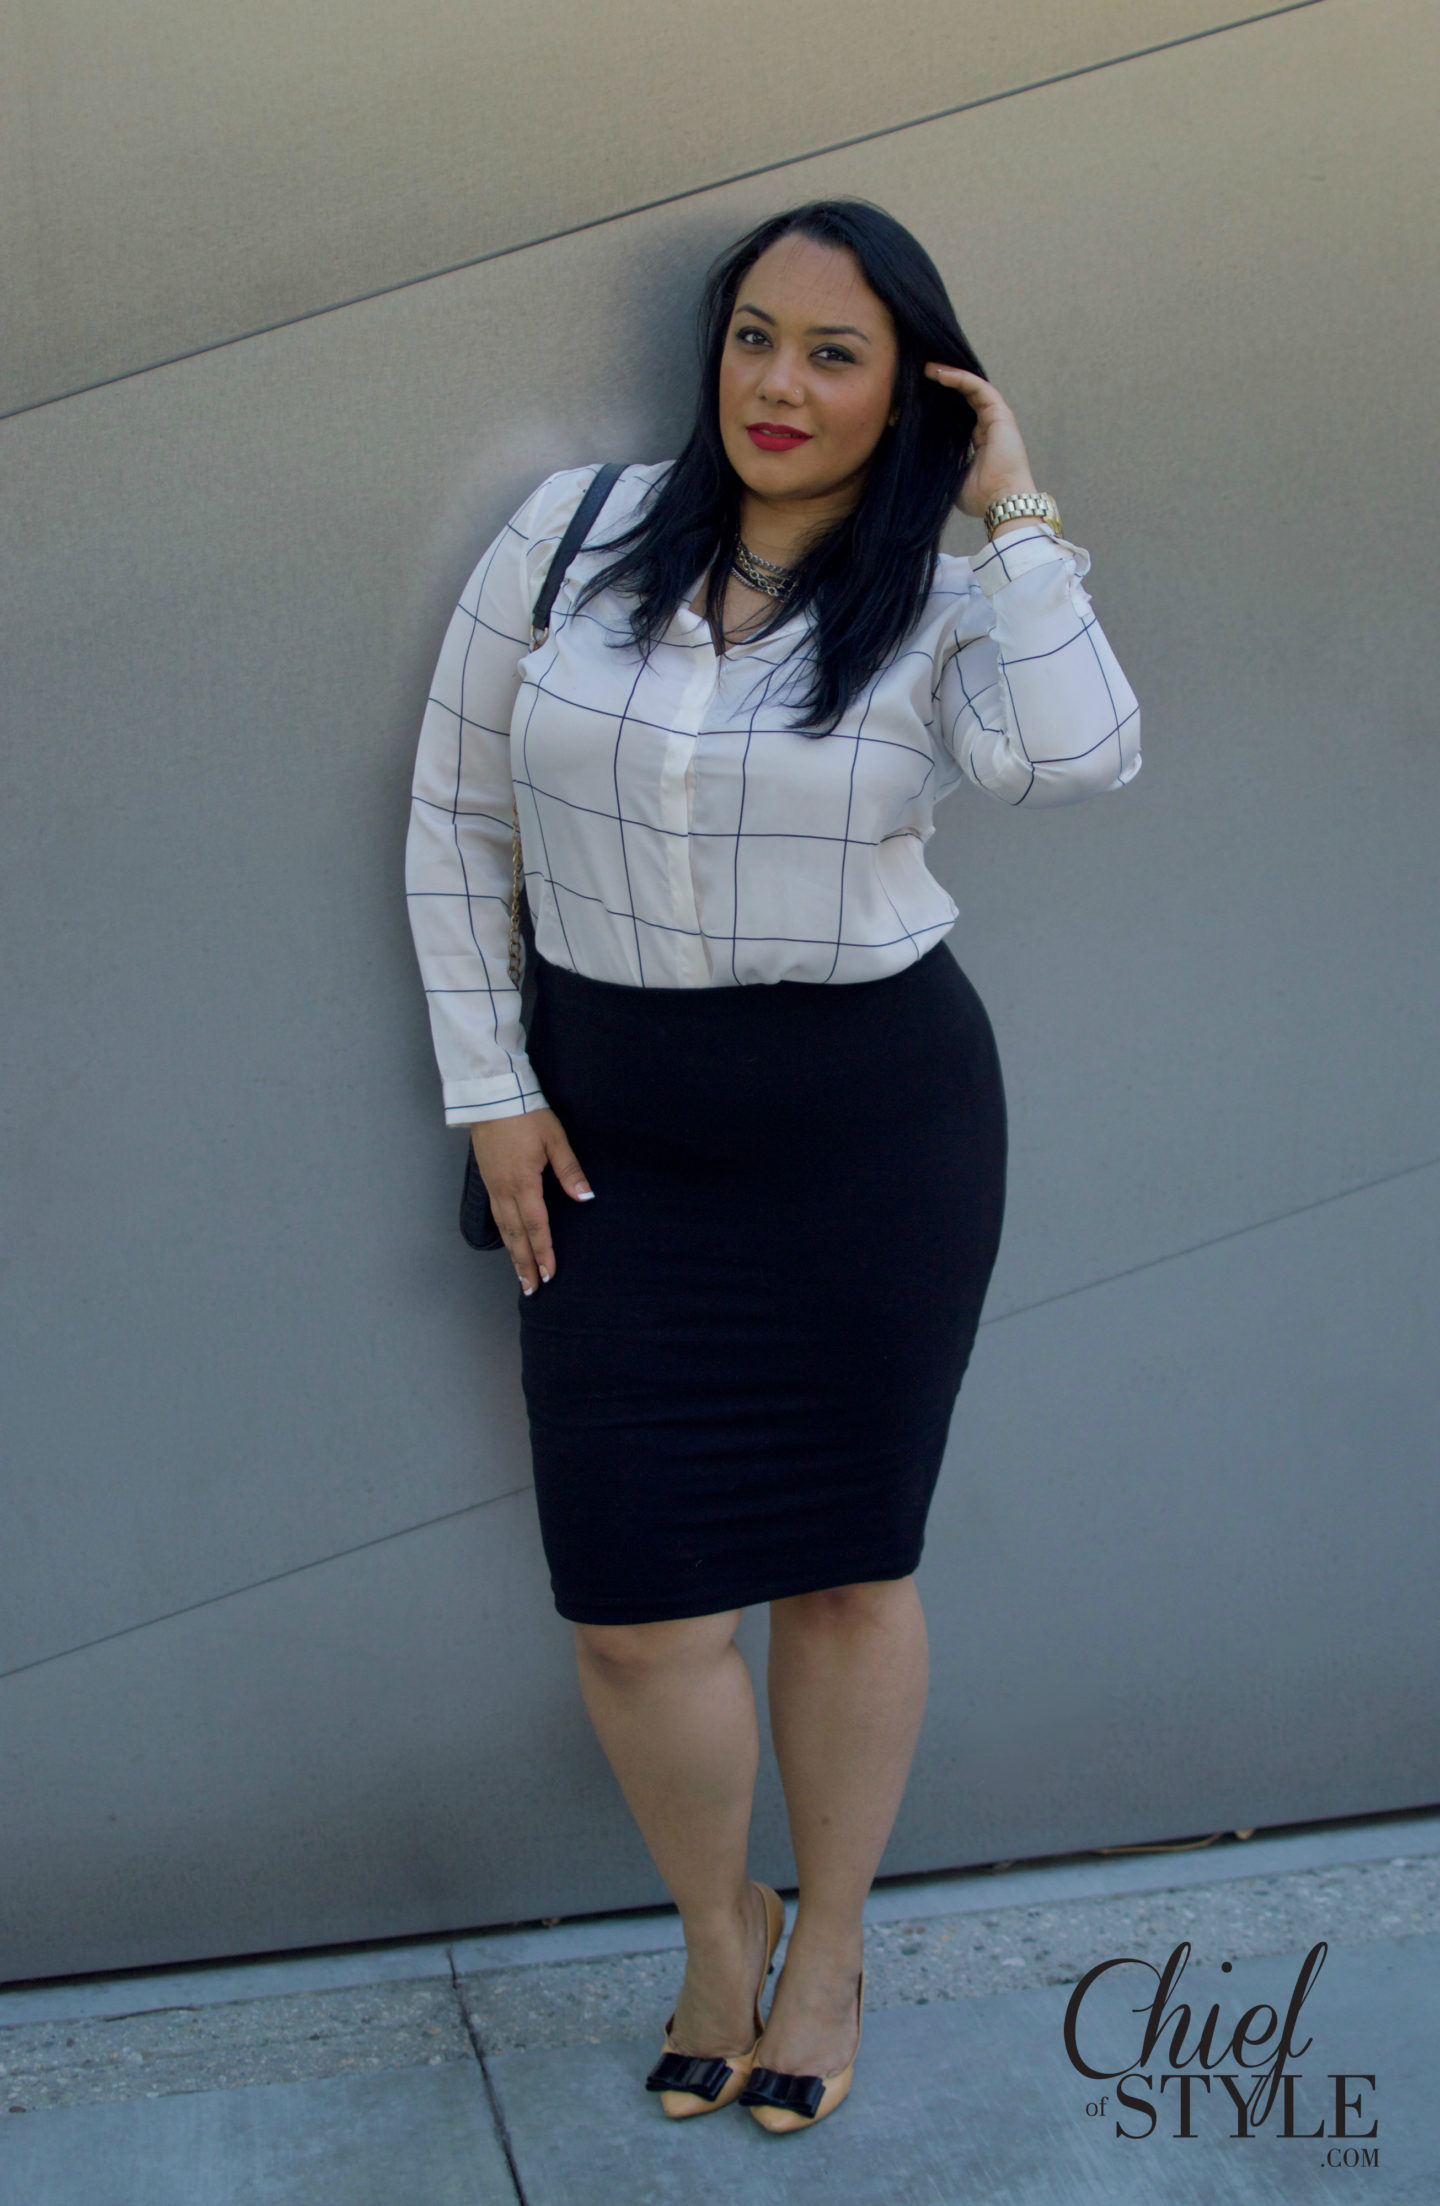 Amy Stretten is the Chief of Style. She is a plus size style blogger from Los Angeles, California.